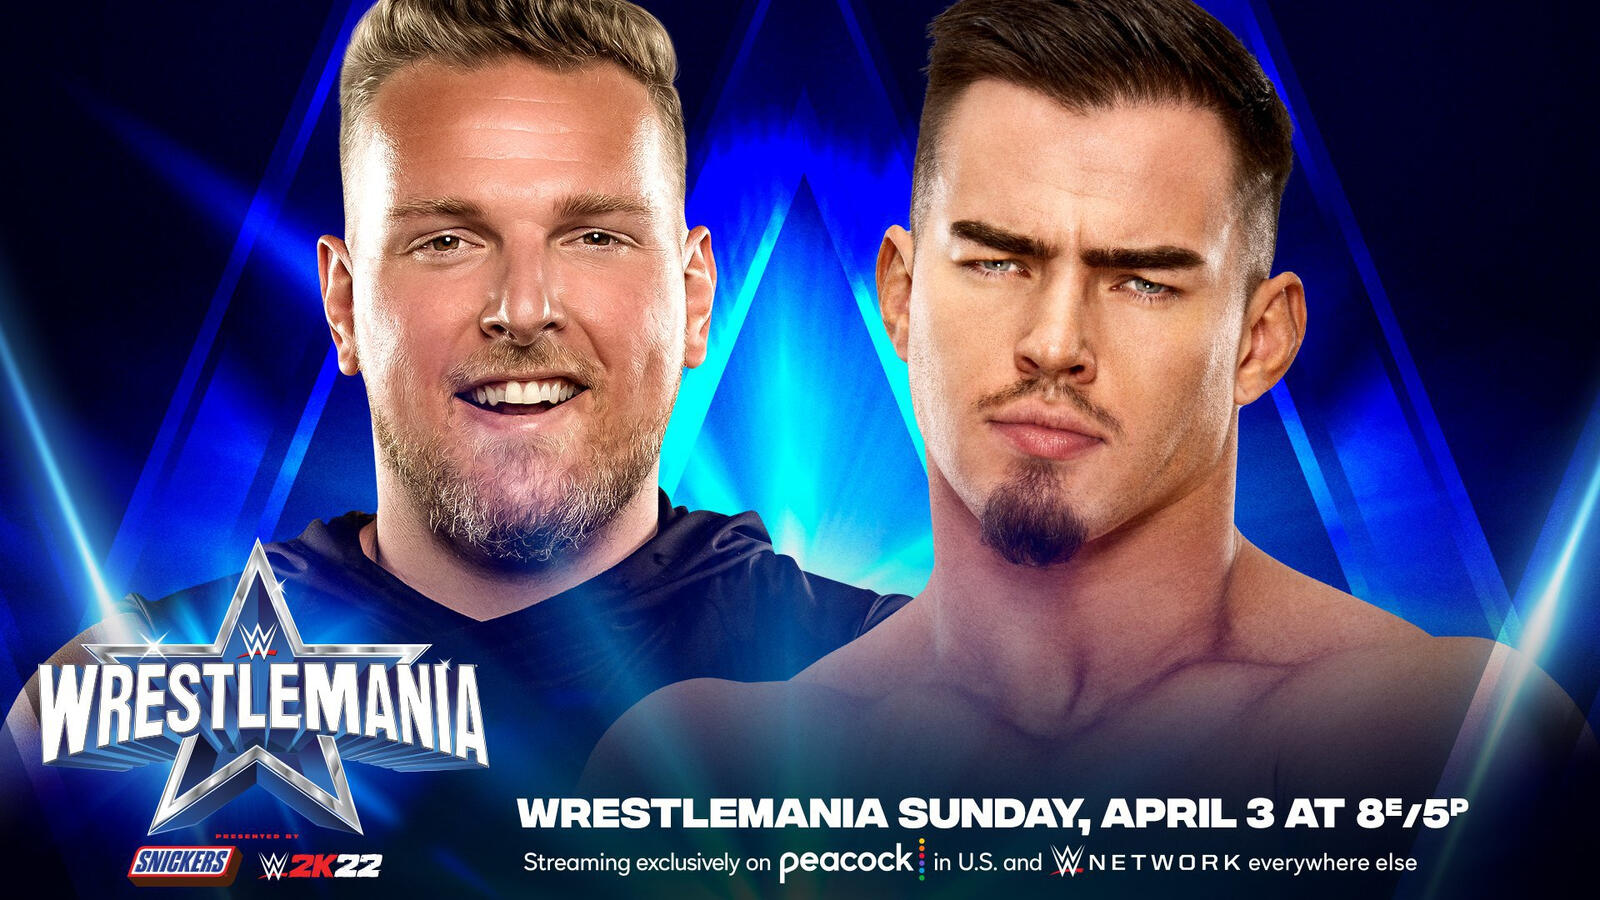 Wrestlemania 38: WWE Announces New Matches For Sunday, April 3rd 1